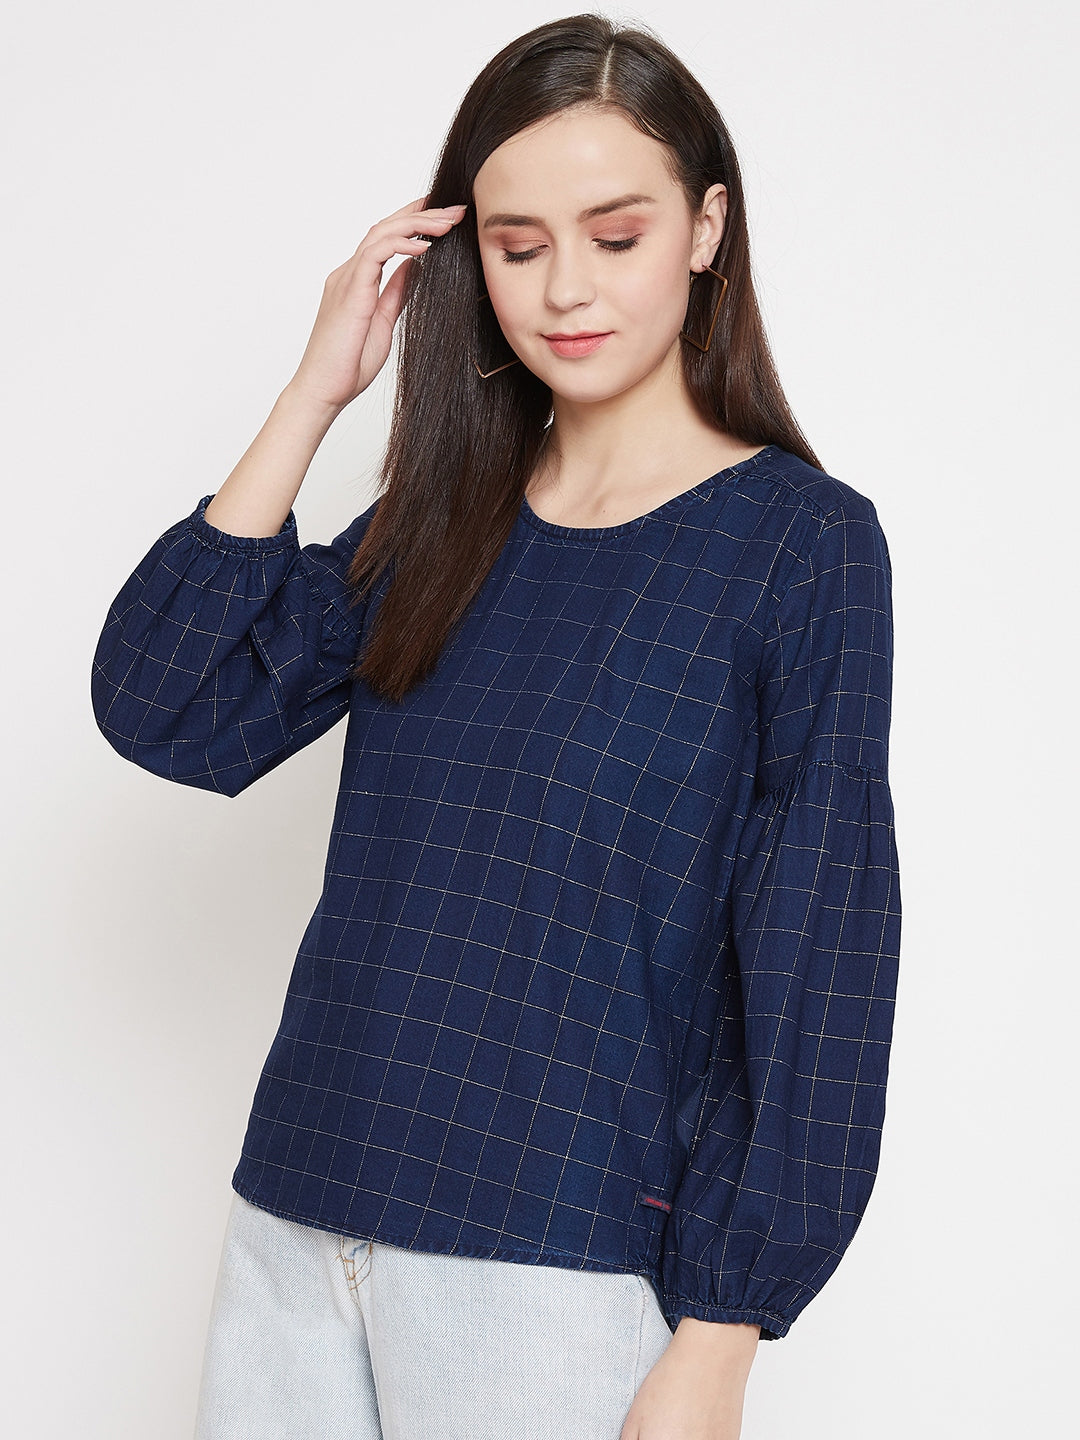 Navy Blue Checked Round Neck Tops - Women Tops